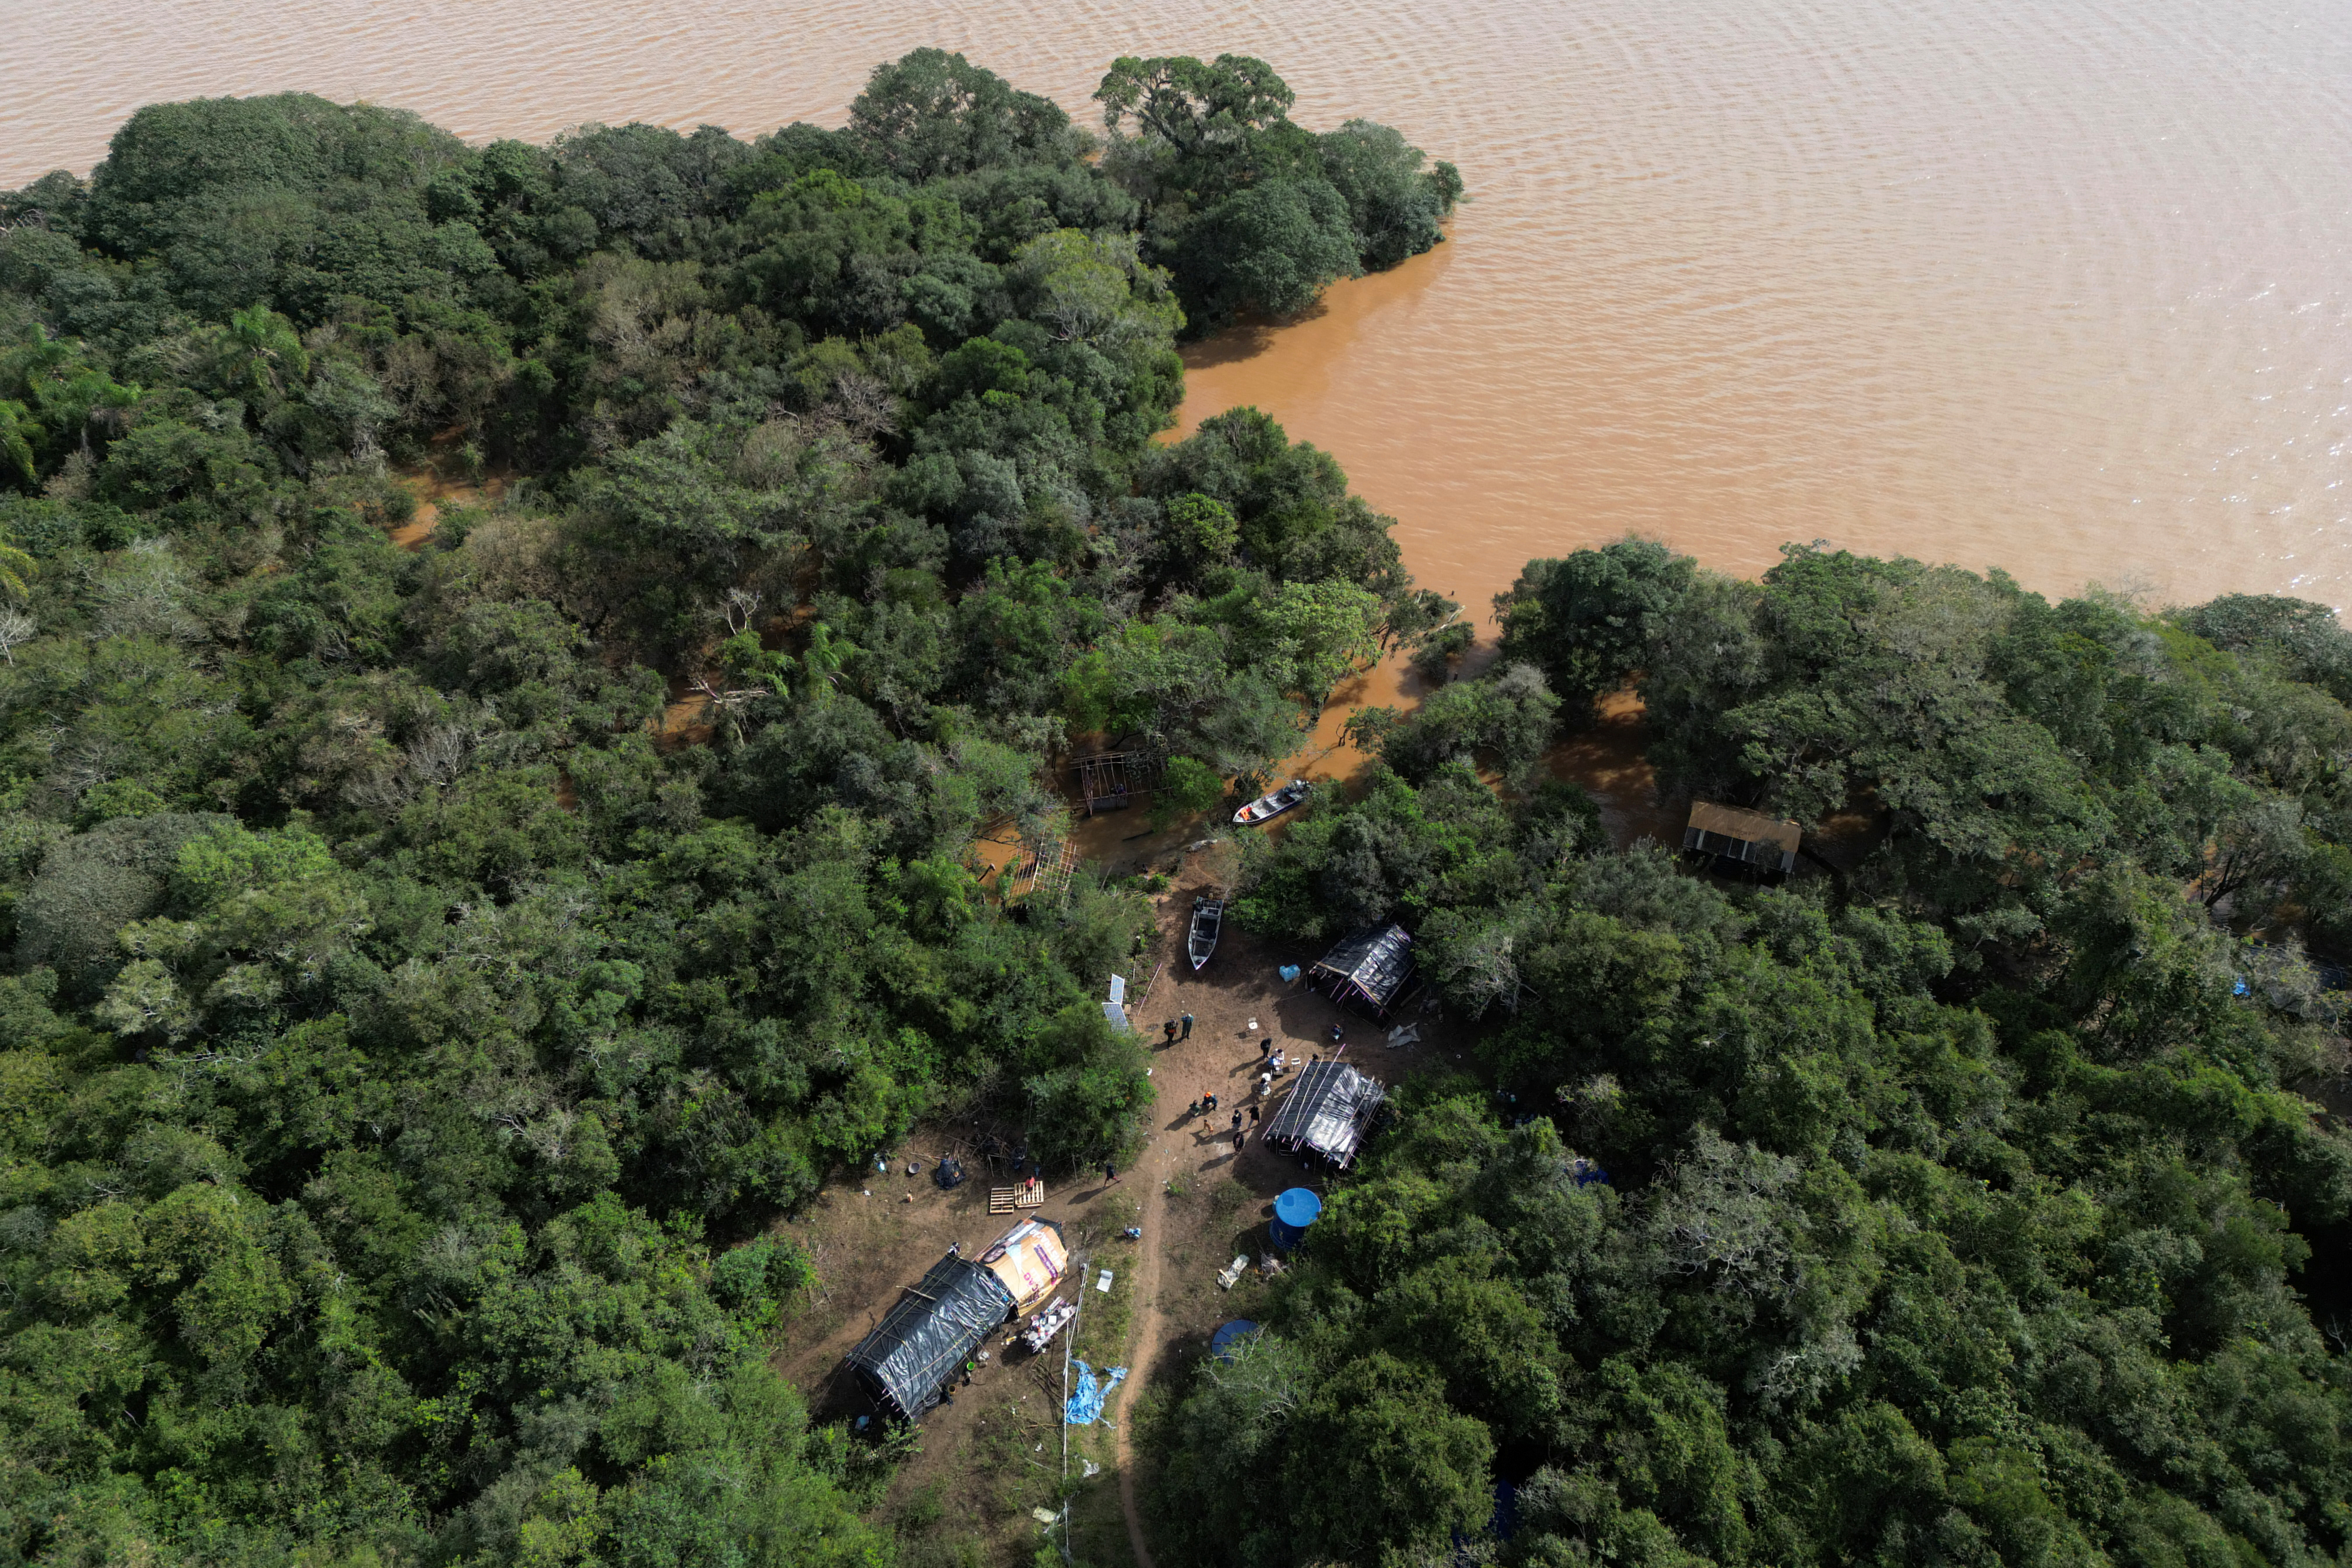 Indigenous Brazil community stays on flooded land in dispute with developer